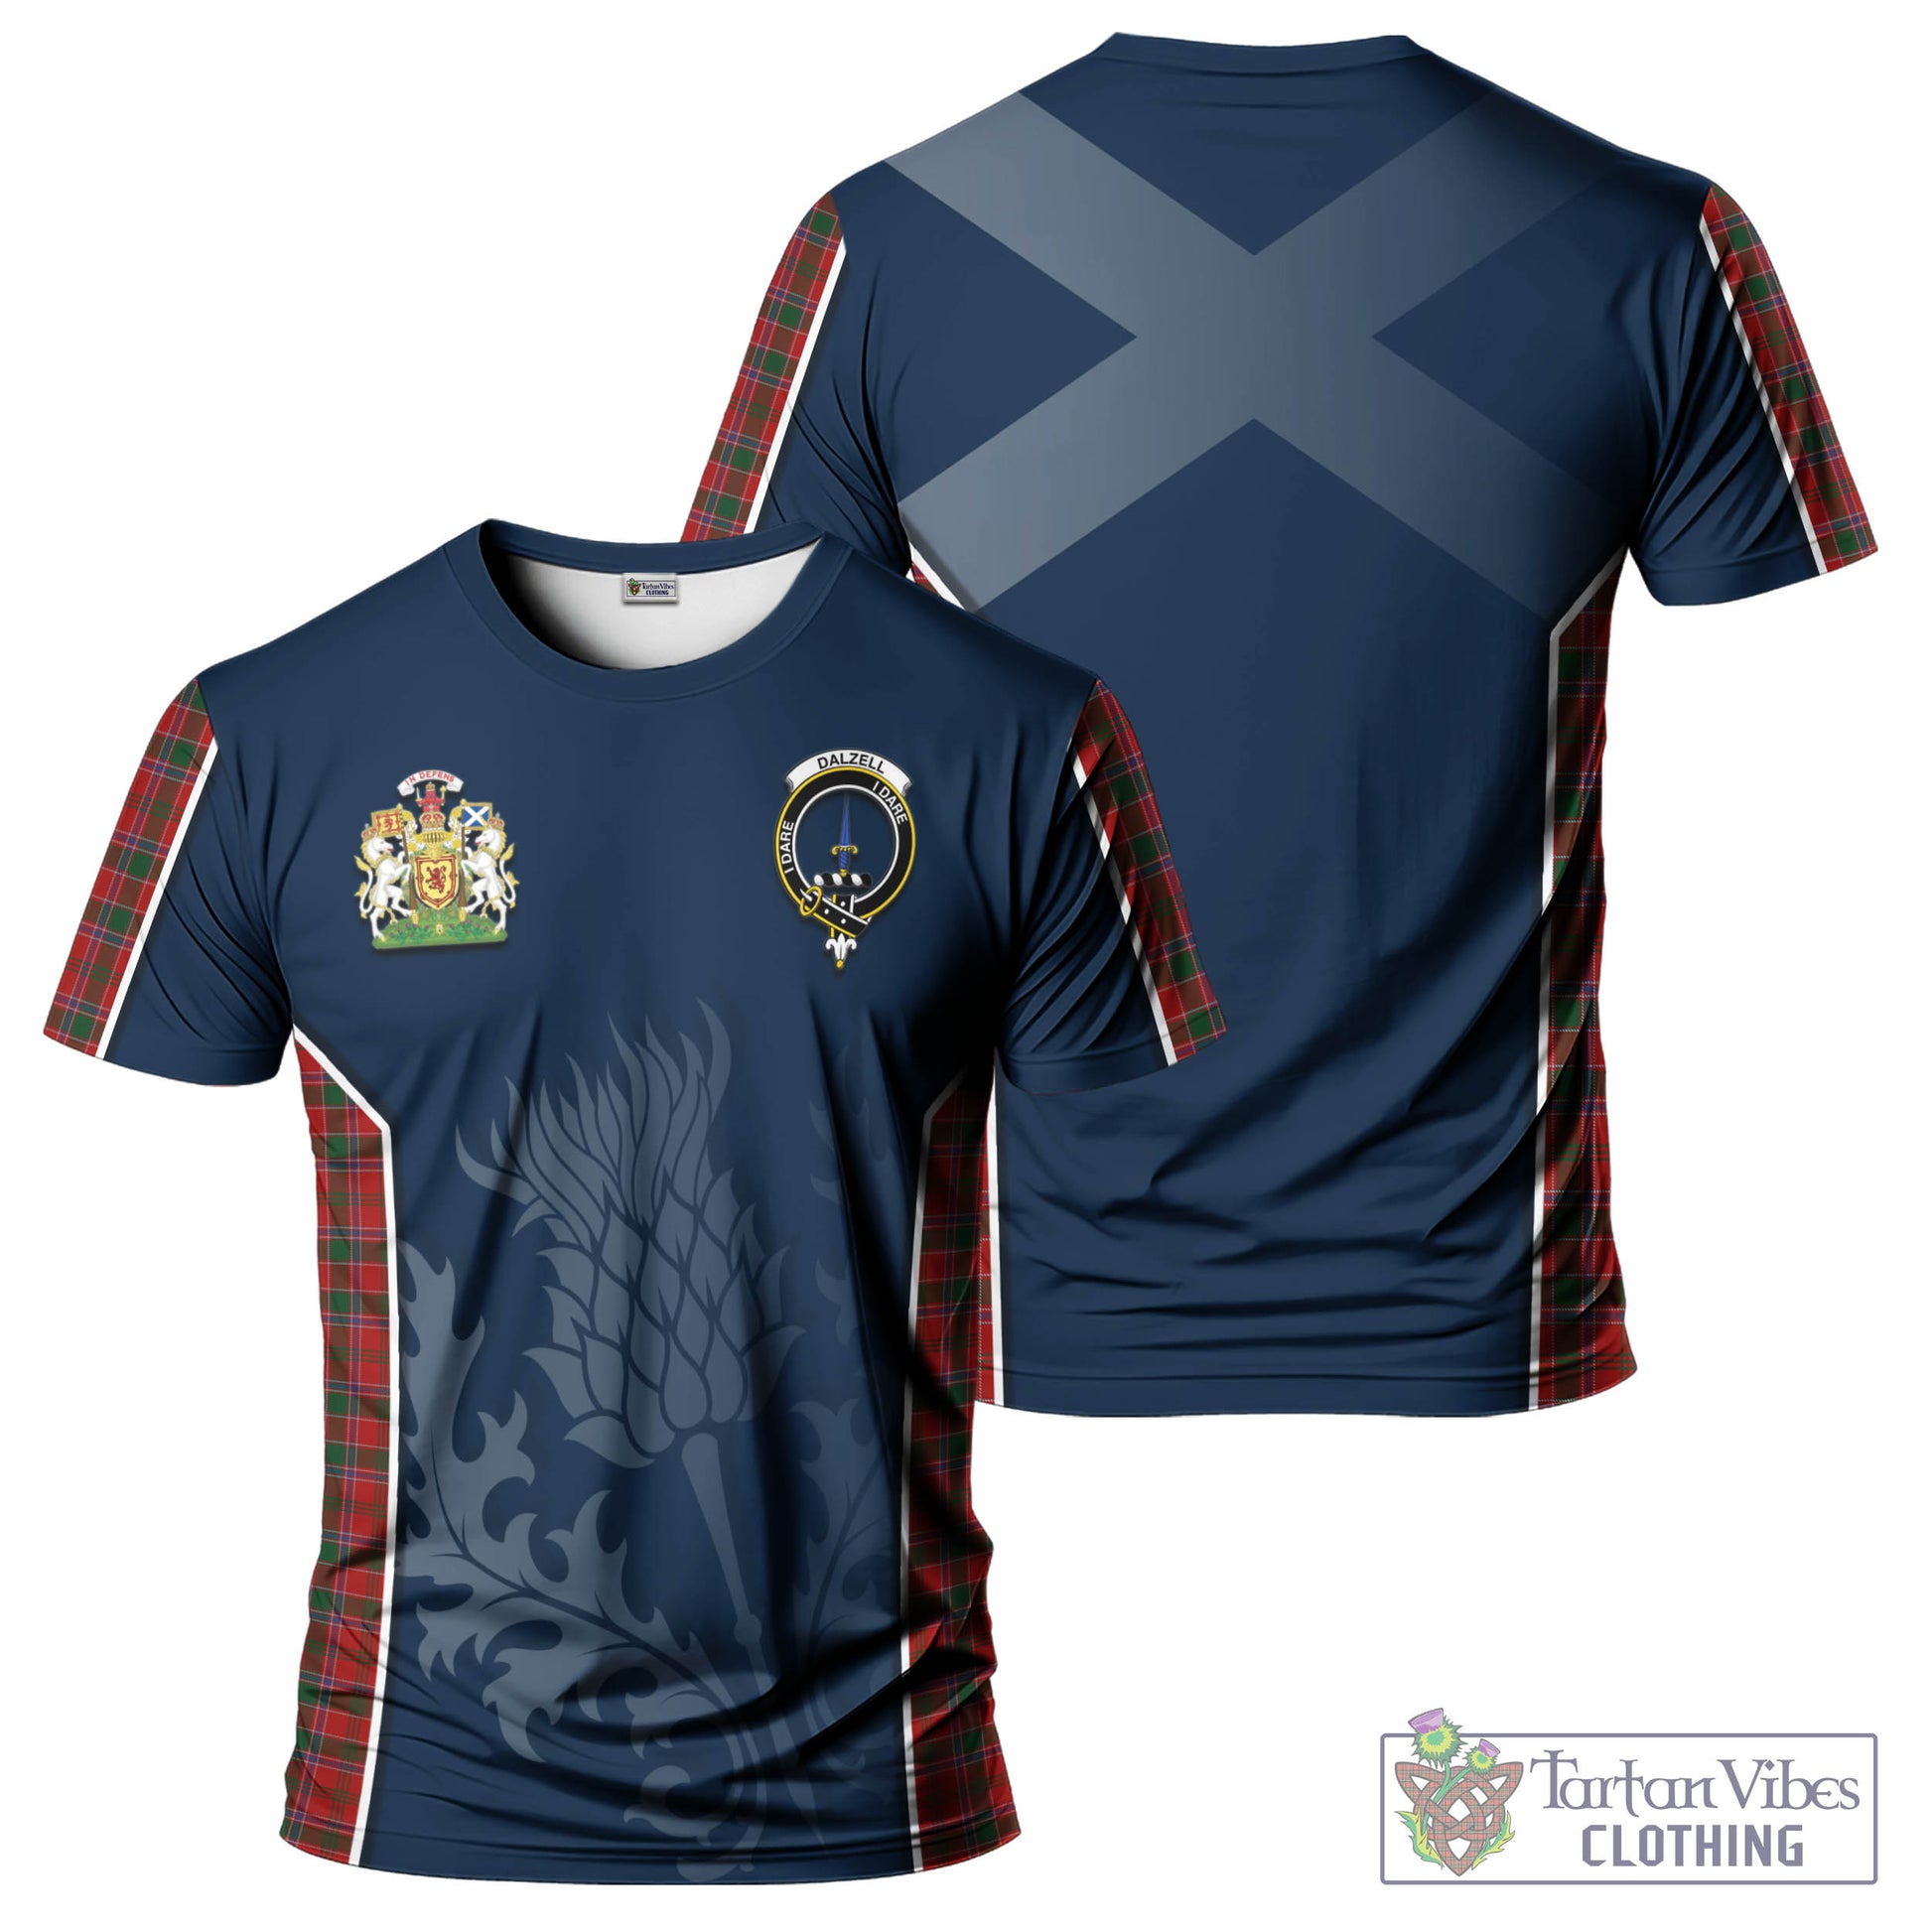 Tartan Vibes Clothing Dalzell (Dalziel) Tartan T-Shirt with Family Crest and Scottish Thistle Vibes Sport Style